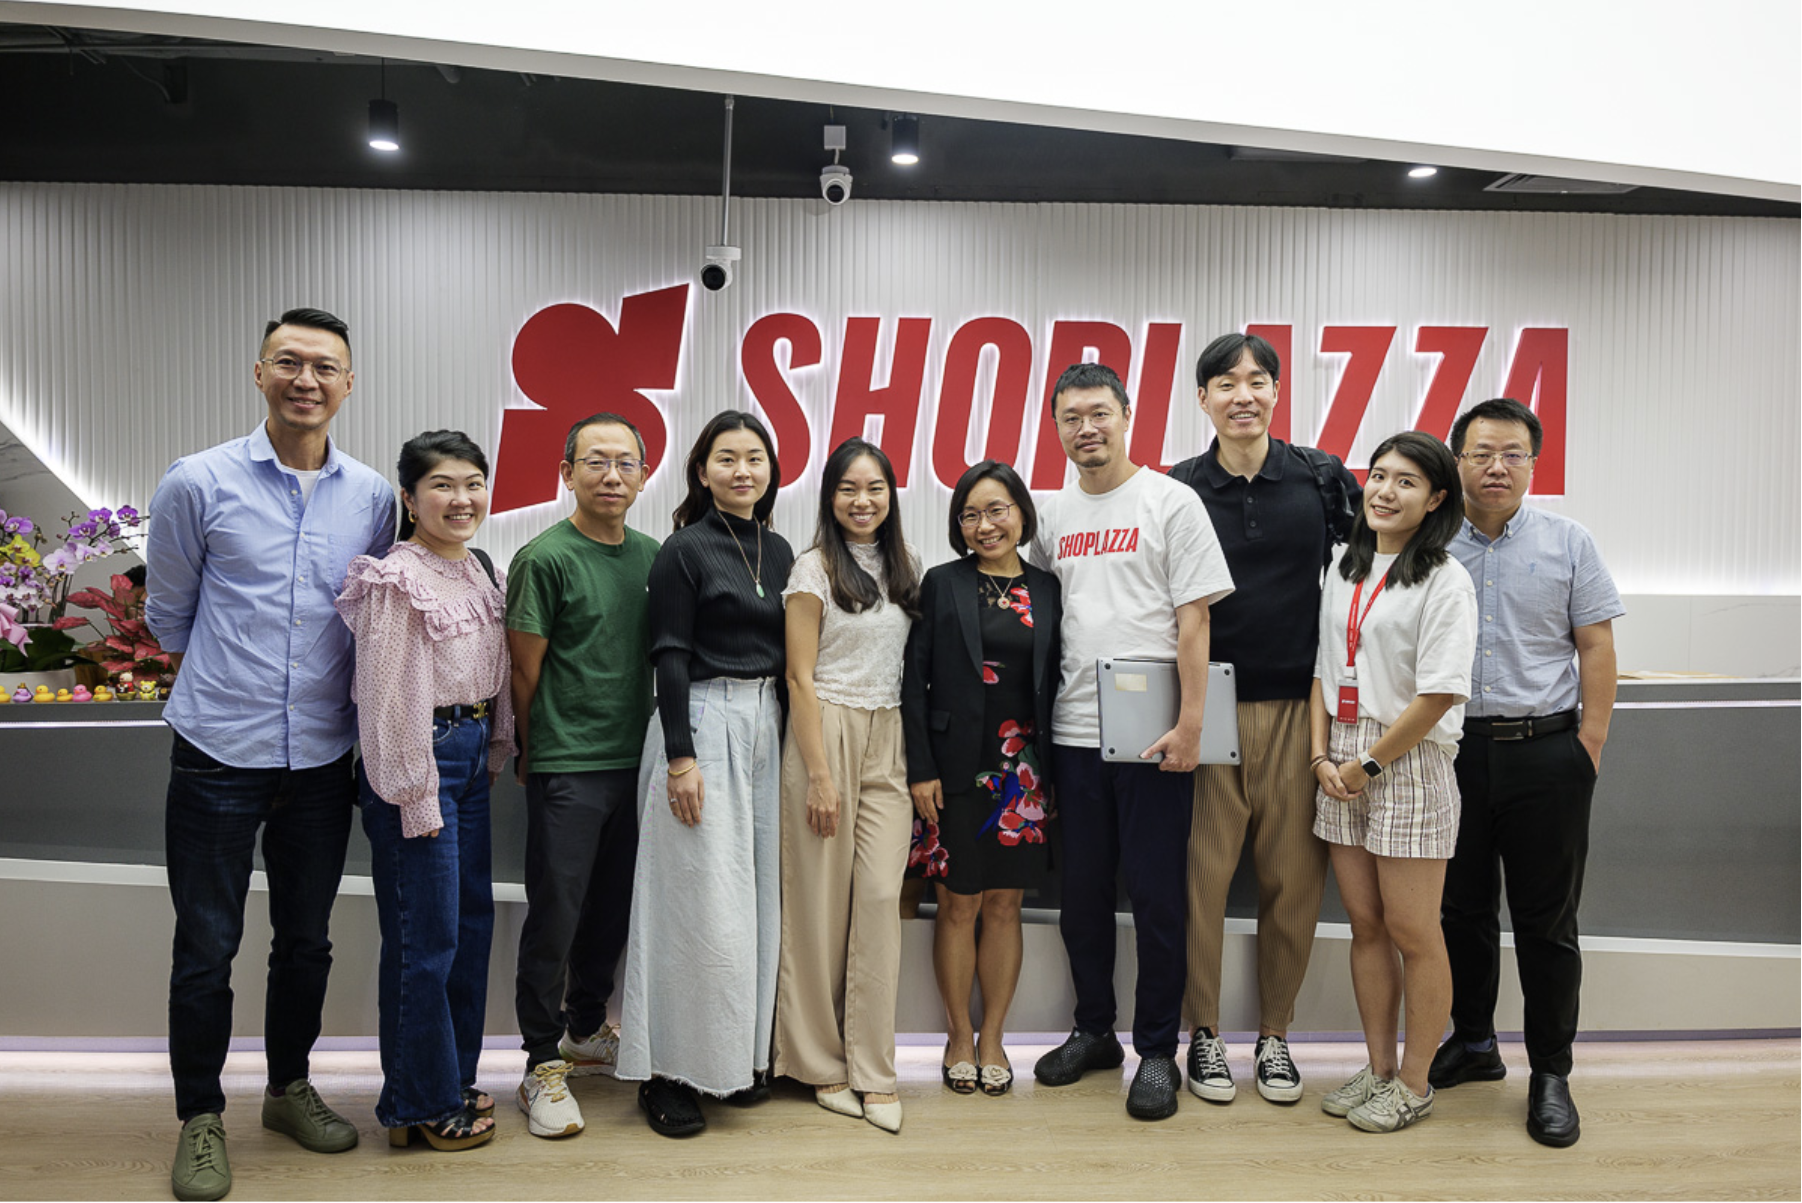 The Shoplazza and Meta APAC teams at the Shoplazza offices, in front of Shoplazza's logo.